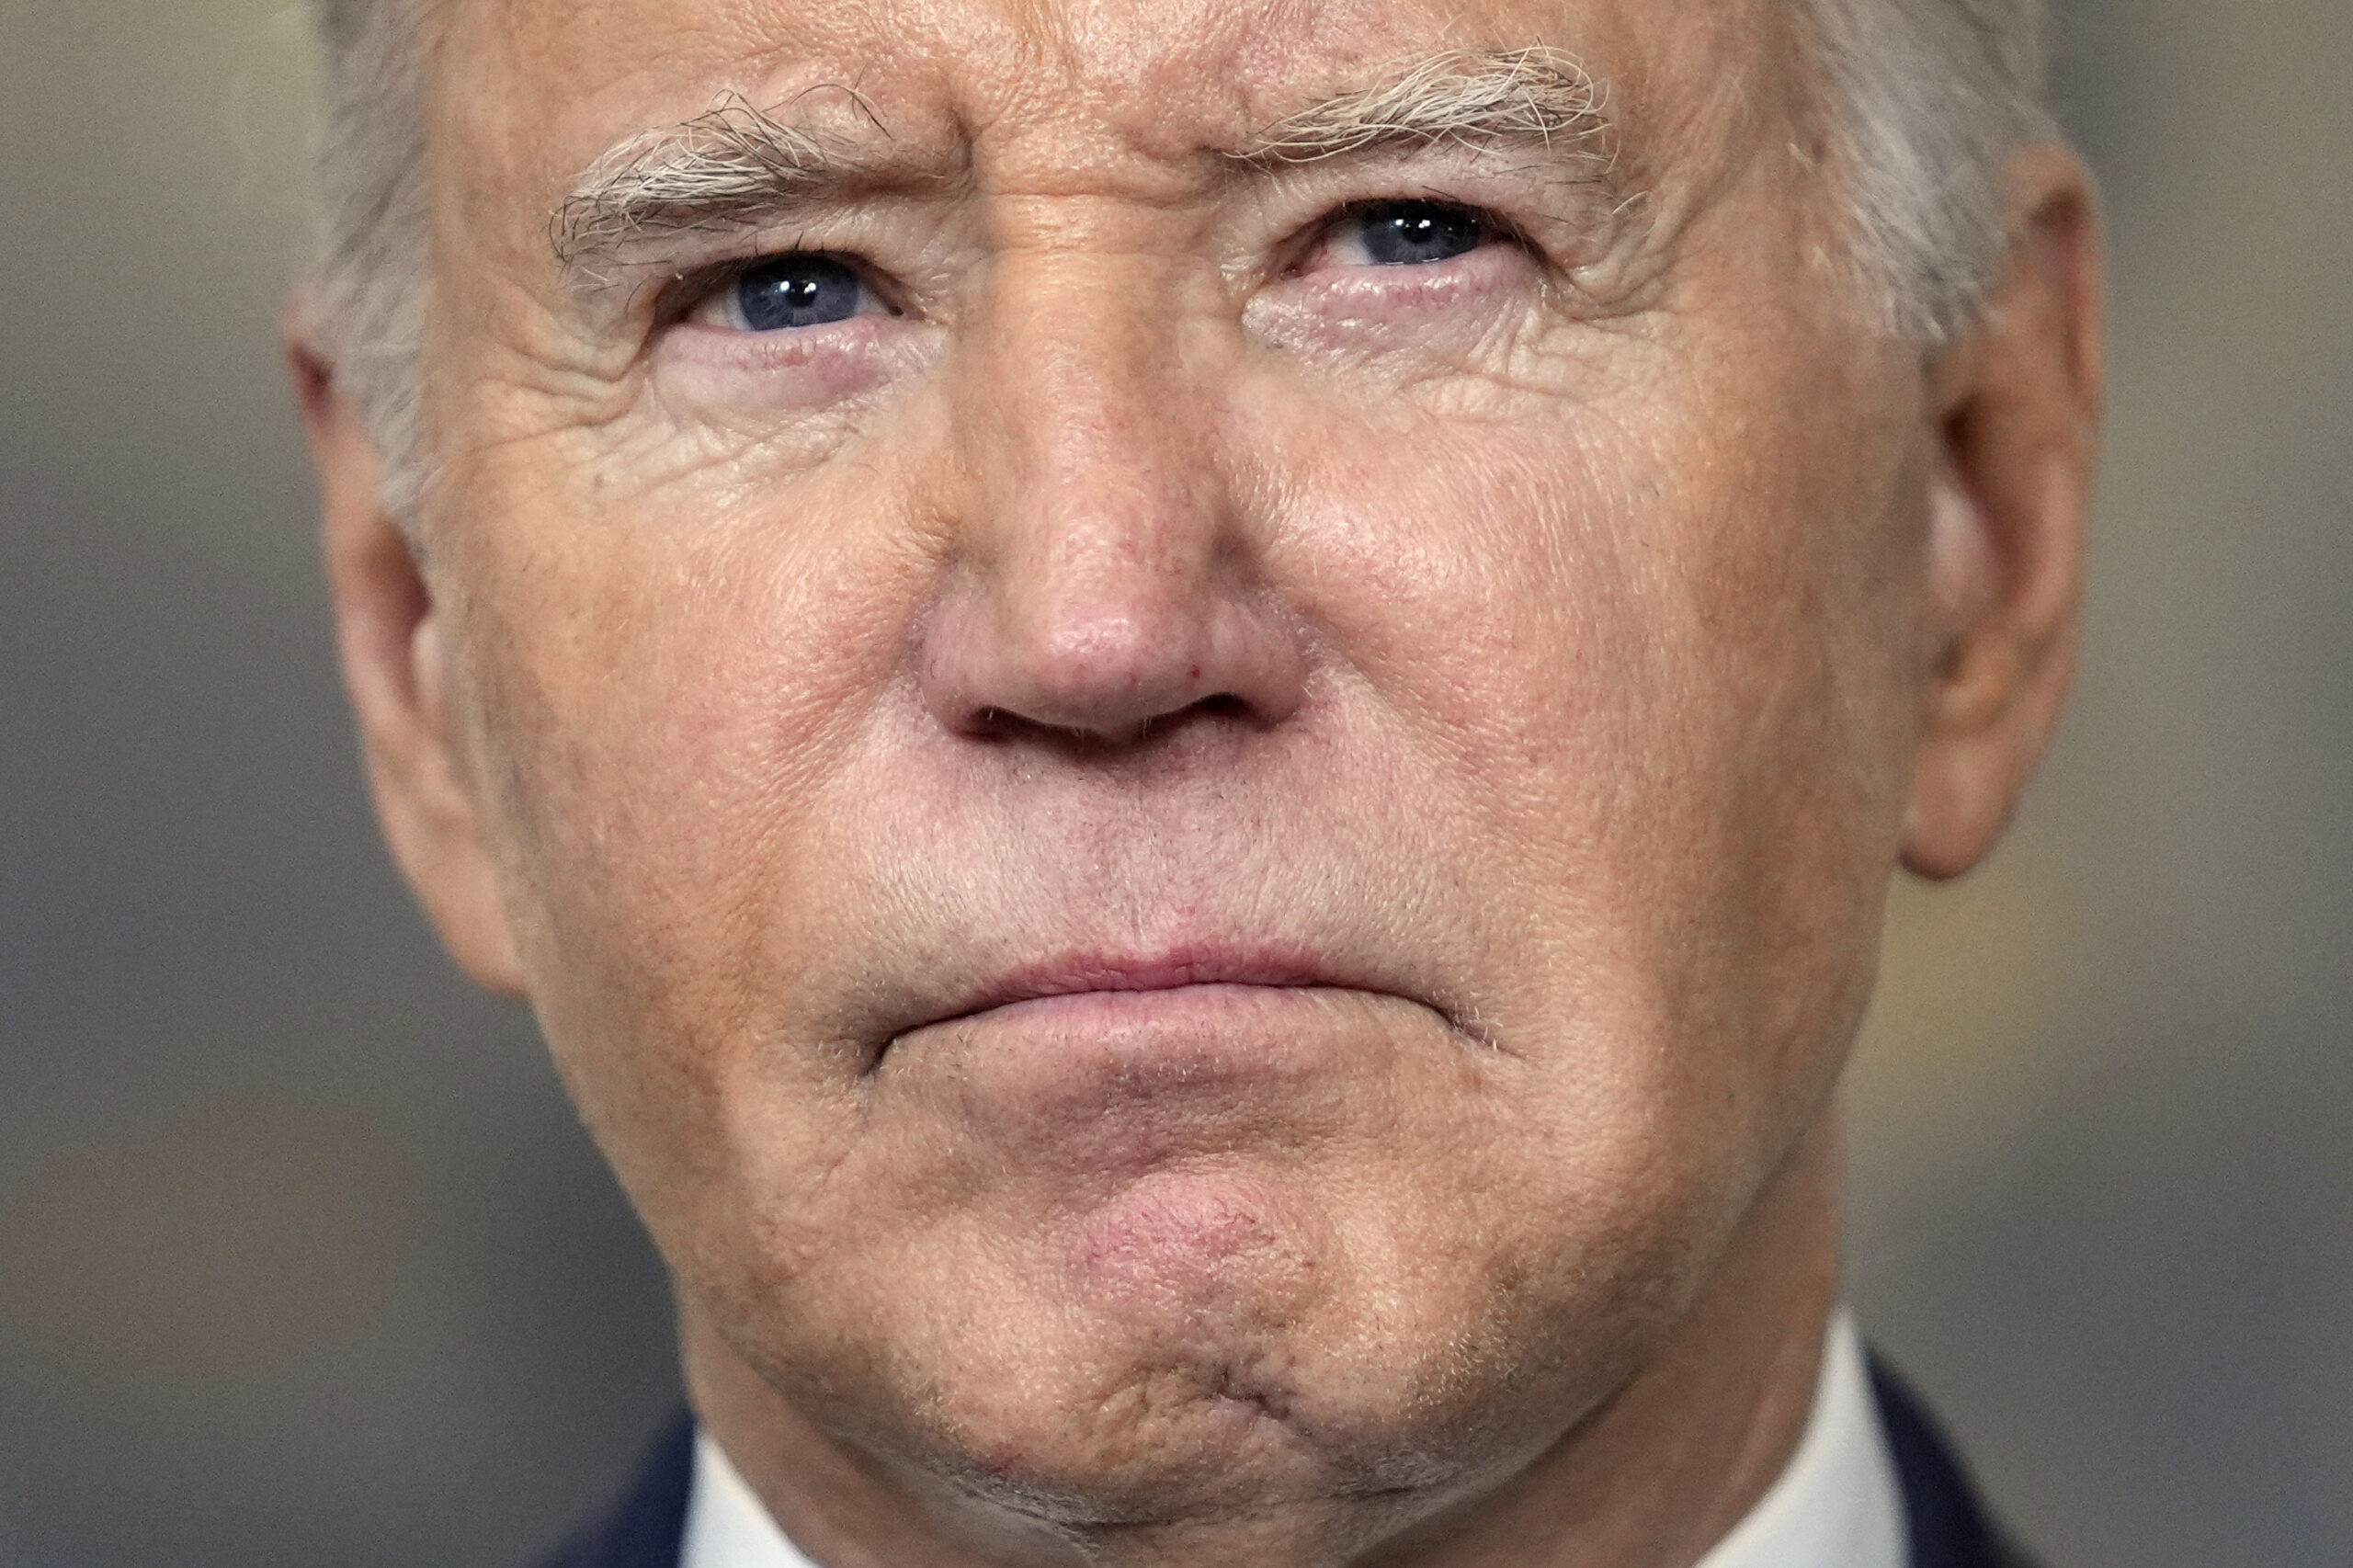 House Republicans Subpoena Transcript of Biden Interview with Special Counsel That Fueled Age Concerns